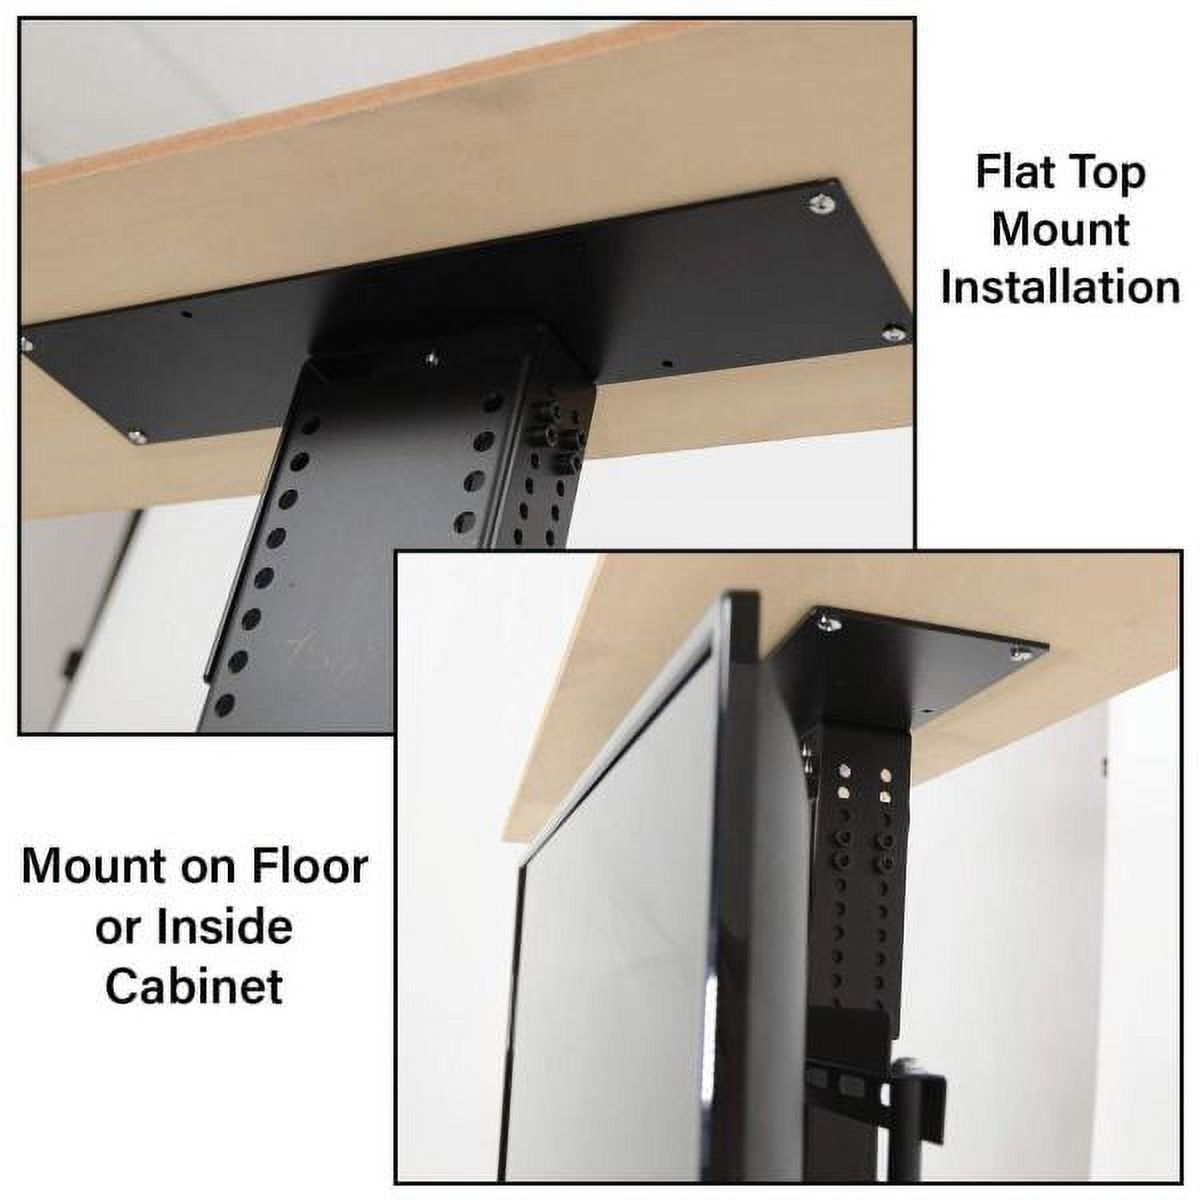 Touchstone Home Products 32800 Pro TV Lift Mechanism for 50 in. Flat Screen TV - image 2 of 2